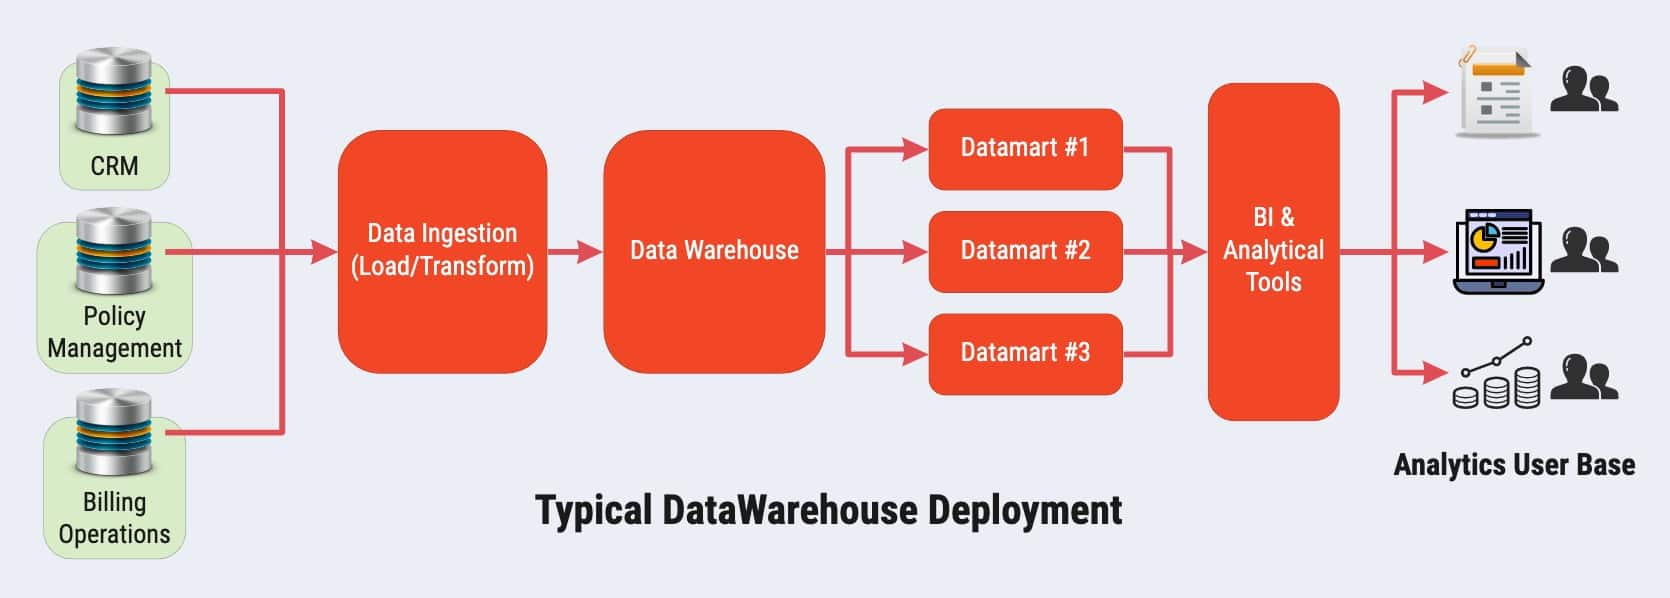 Flow chart of a typical data warehouse deployment from the data location to multiple testing stages to the analytics user base.